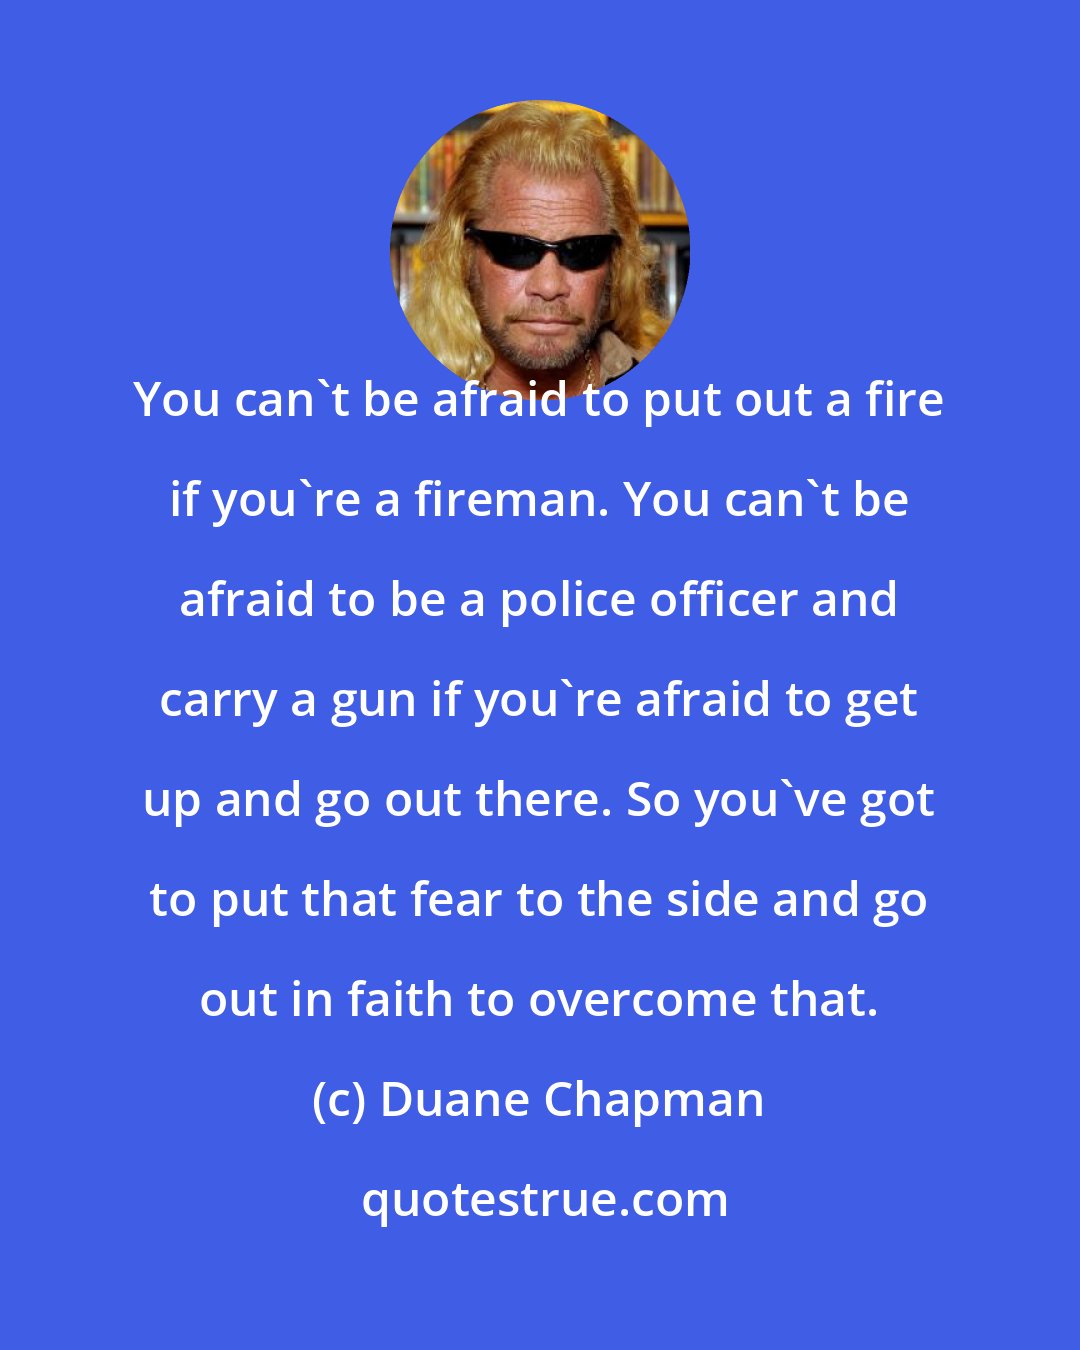 Duane Chapman: You can't be afraid to put out a fire if you're a fireman. You can't be afraid to be a police officer and carry a gun if you're afraid to get up and go out there. So you've got to put that fear to the side and go out in faith to overcome that.